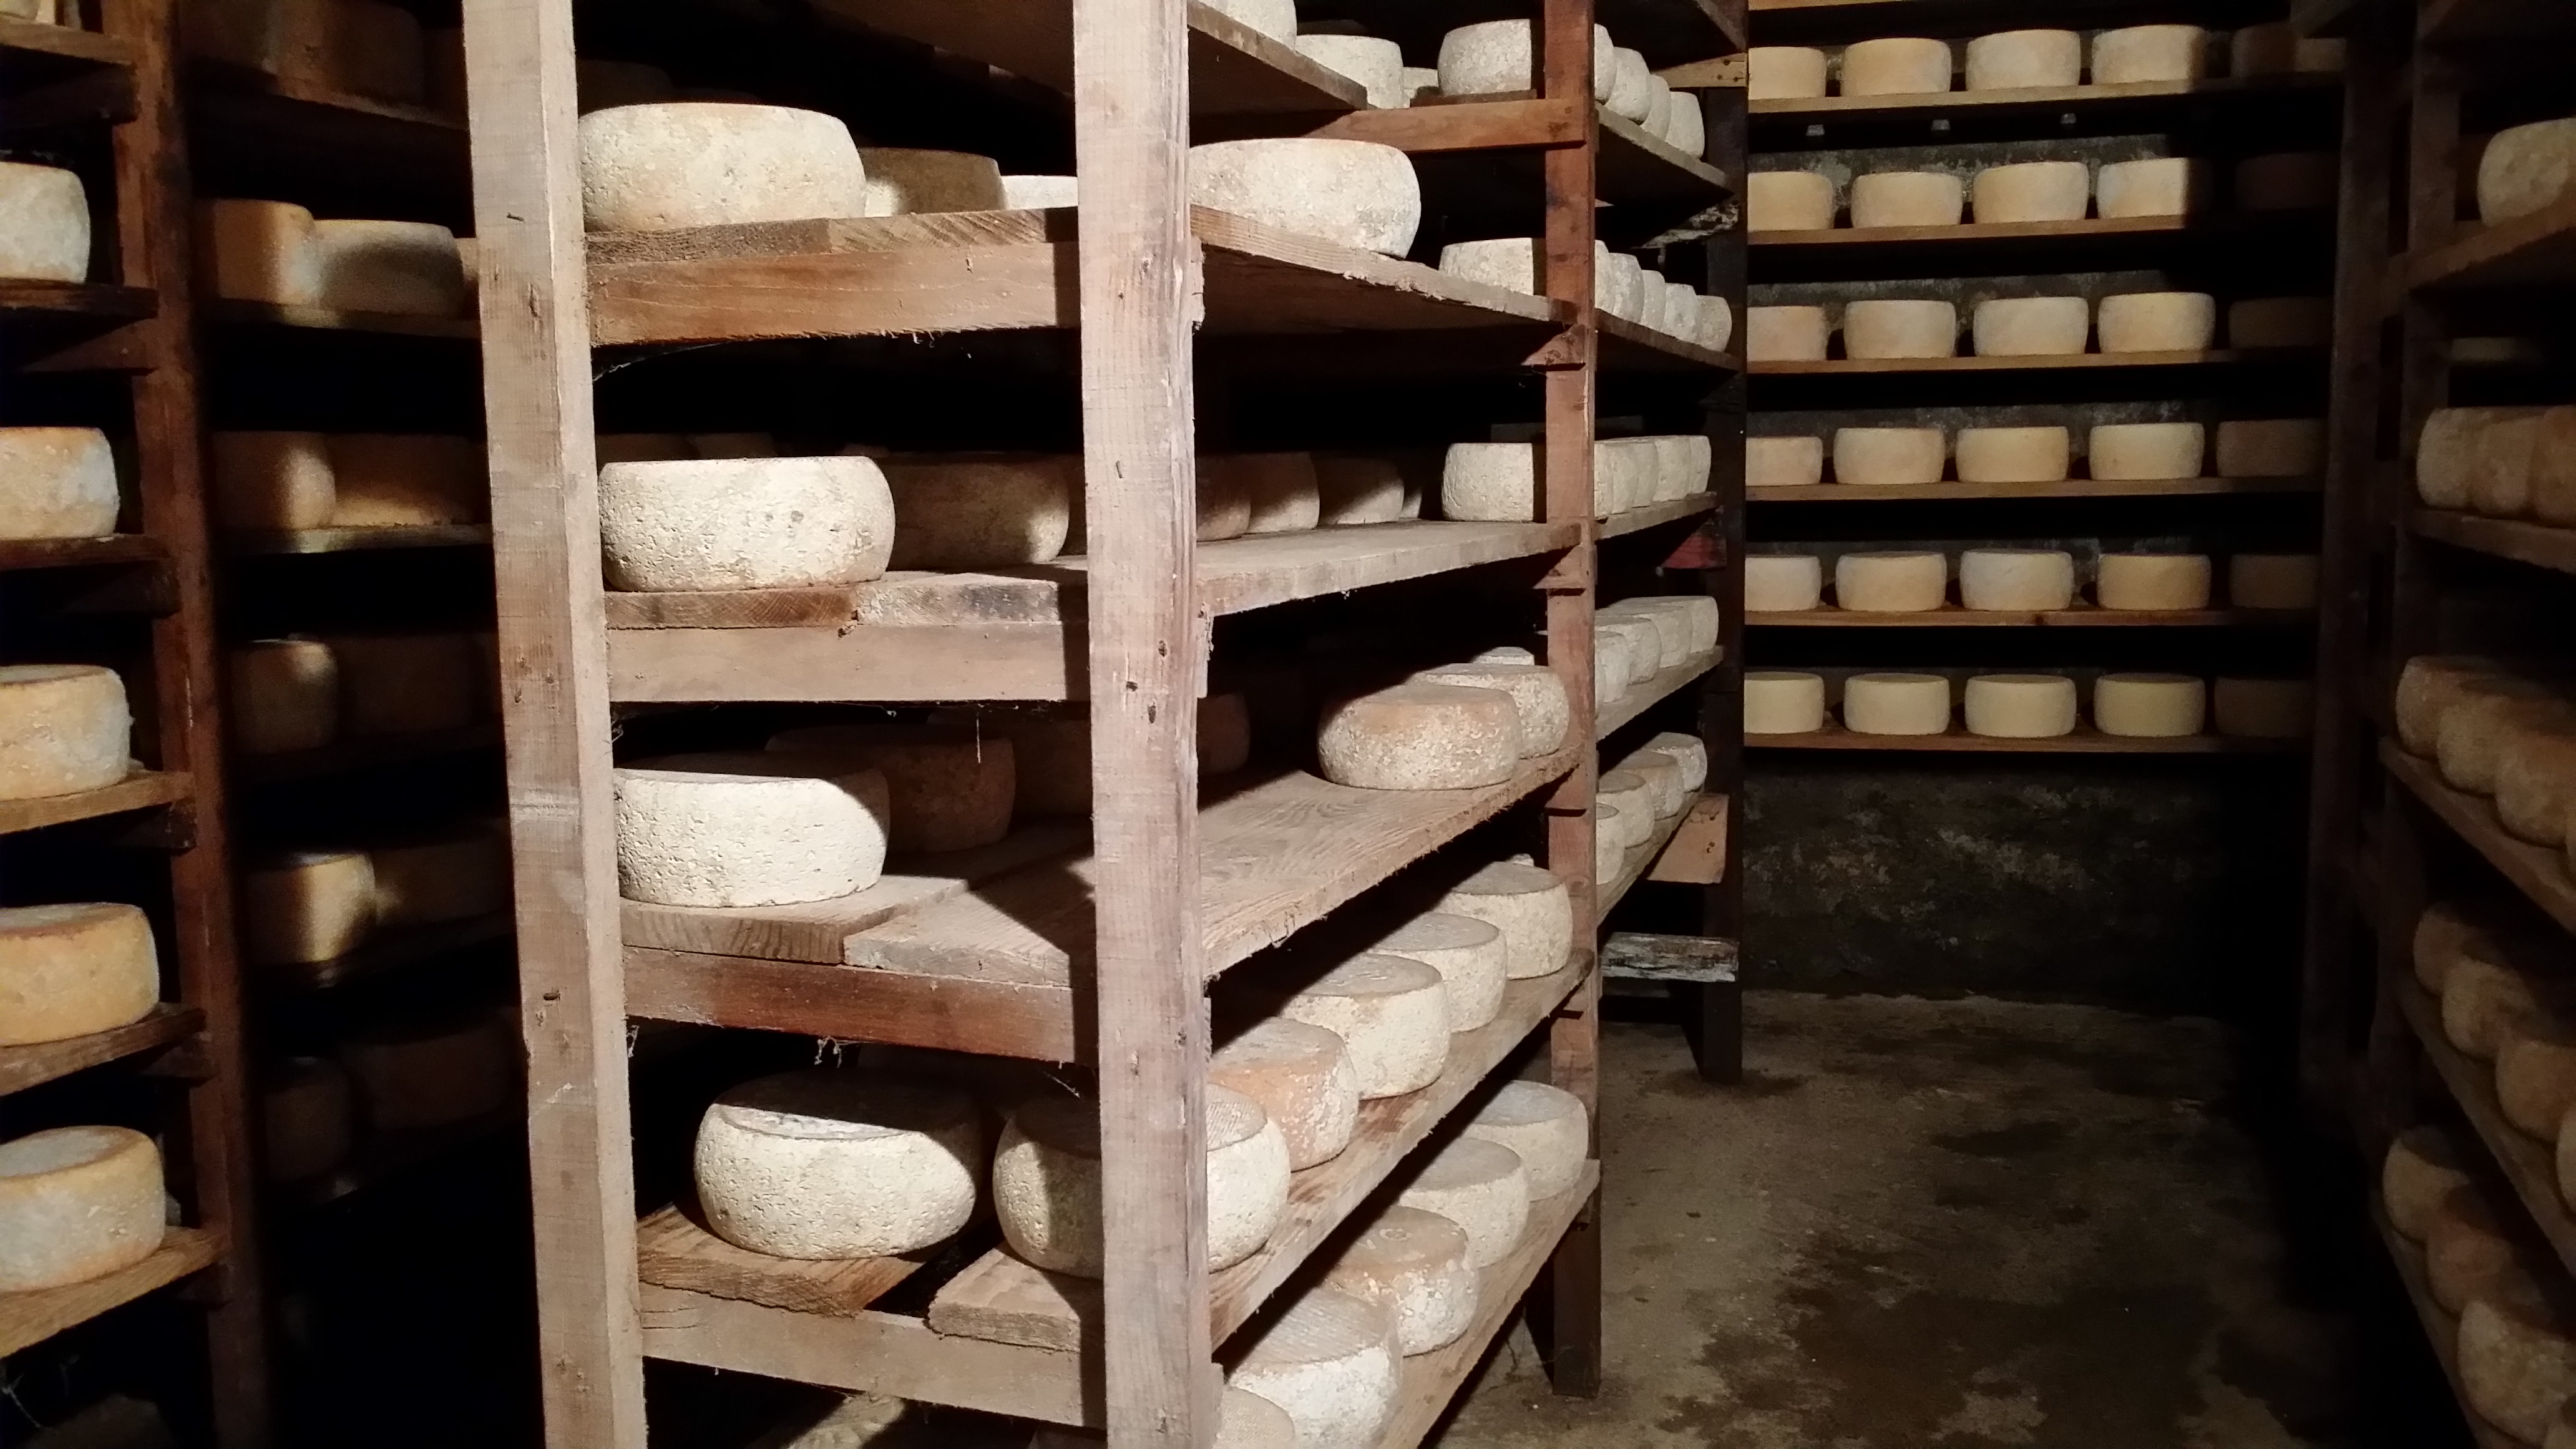 fromage_pyrenees_tomme_luchon_fromagerie_poubeau